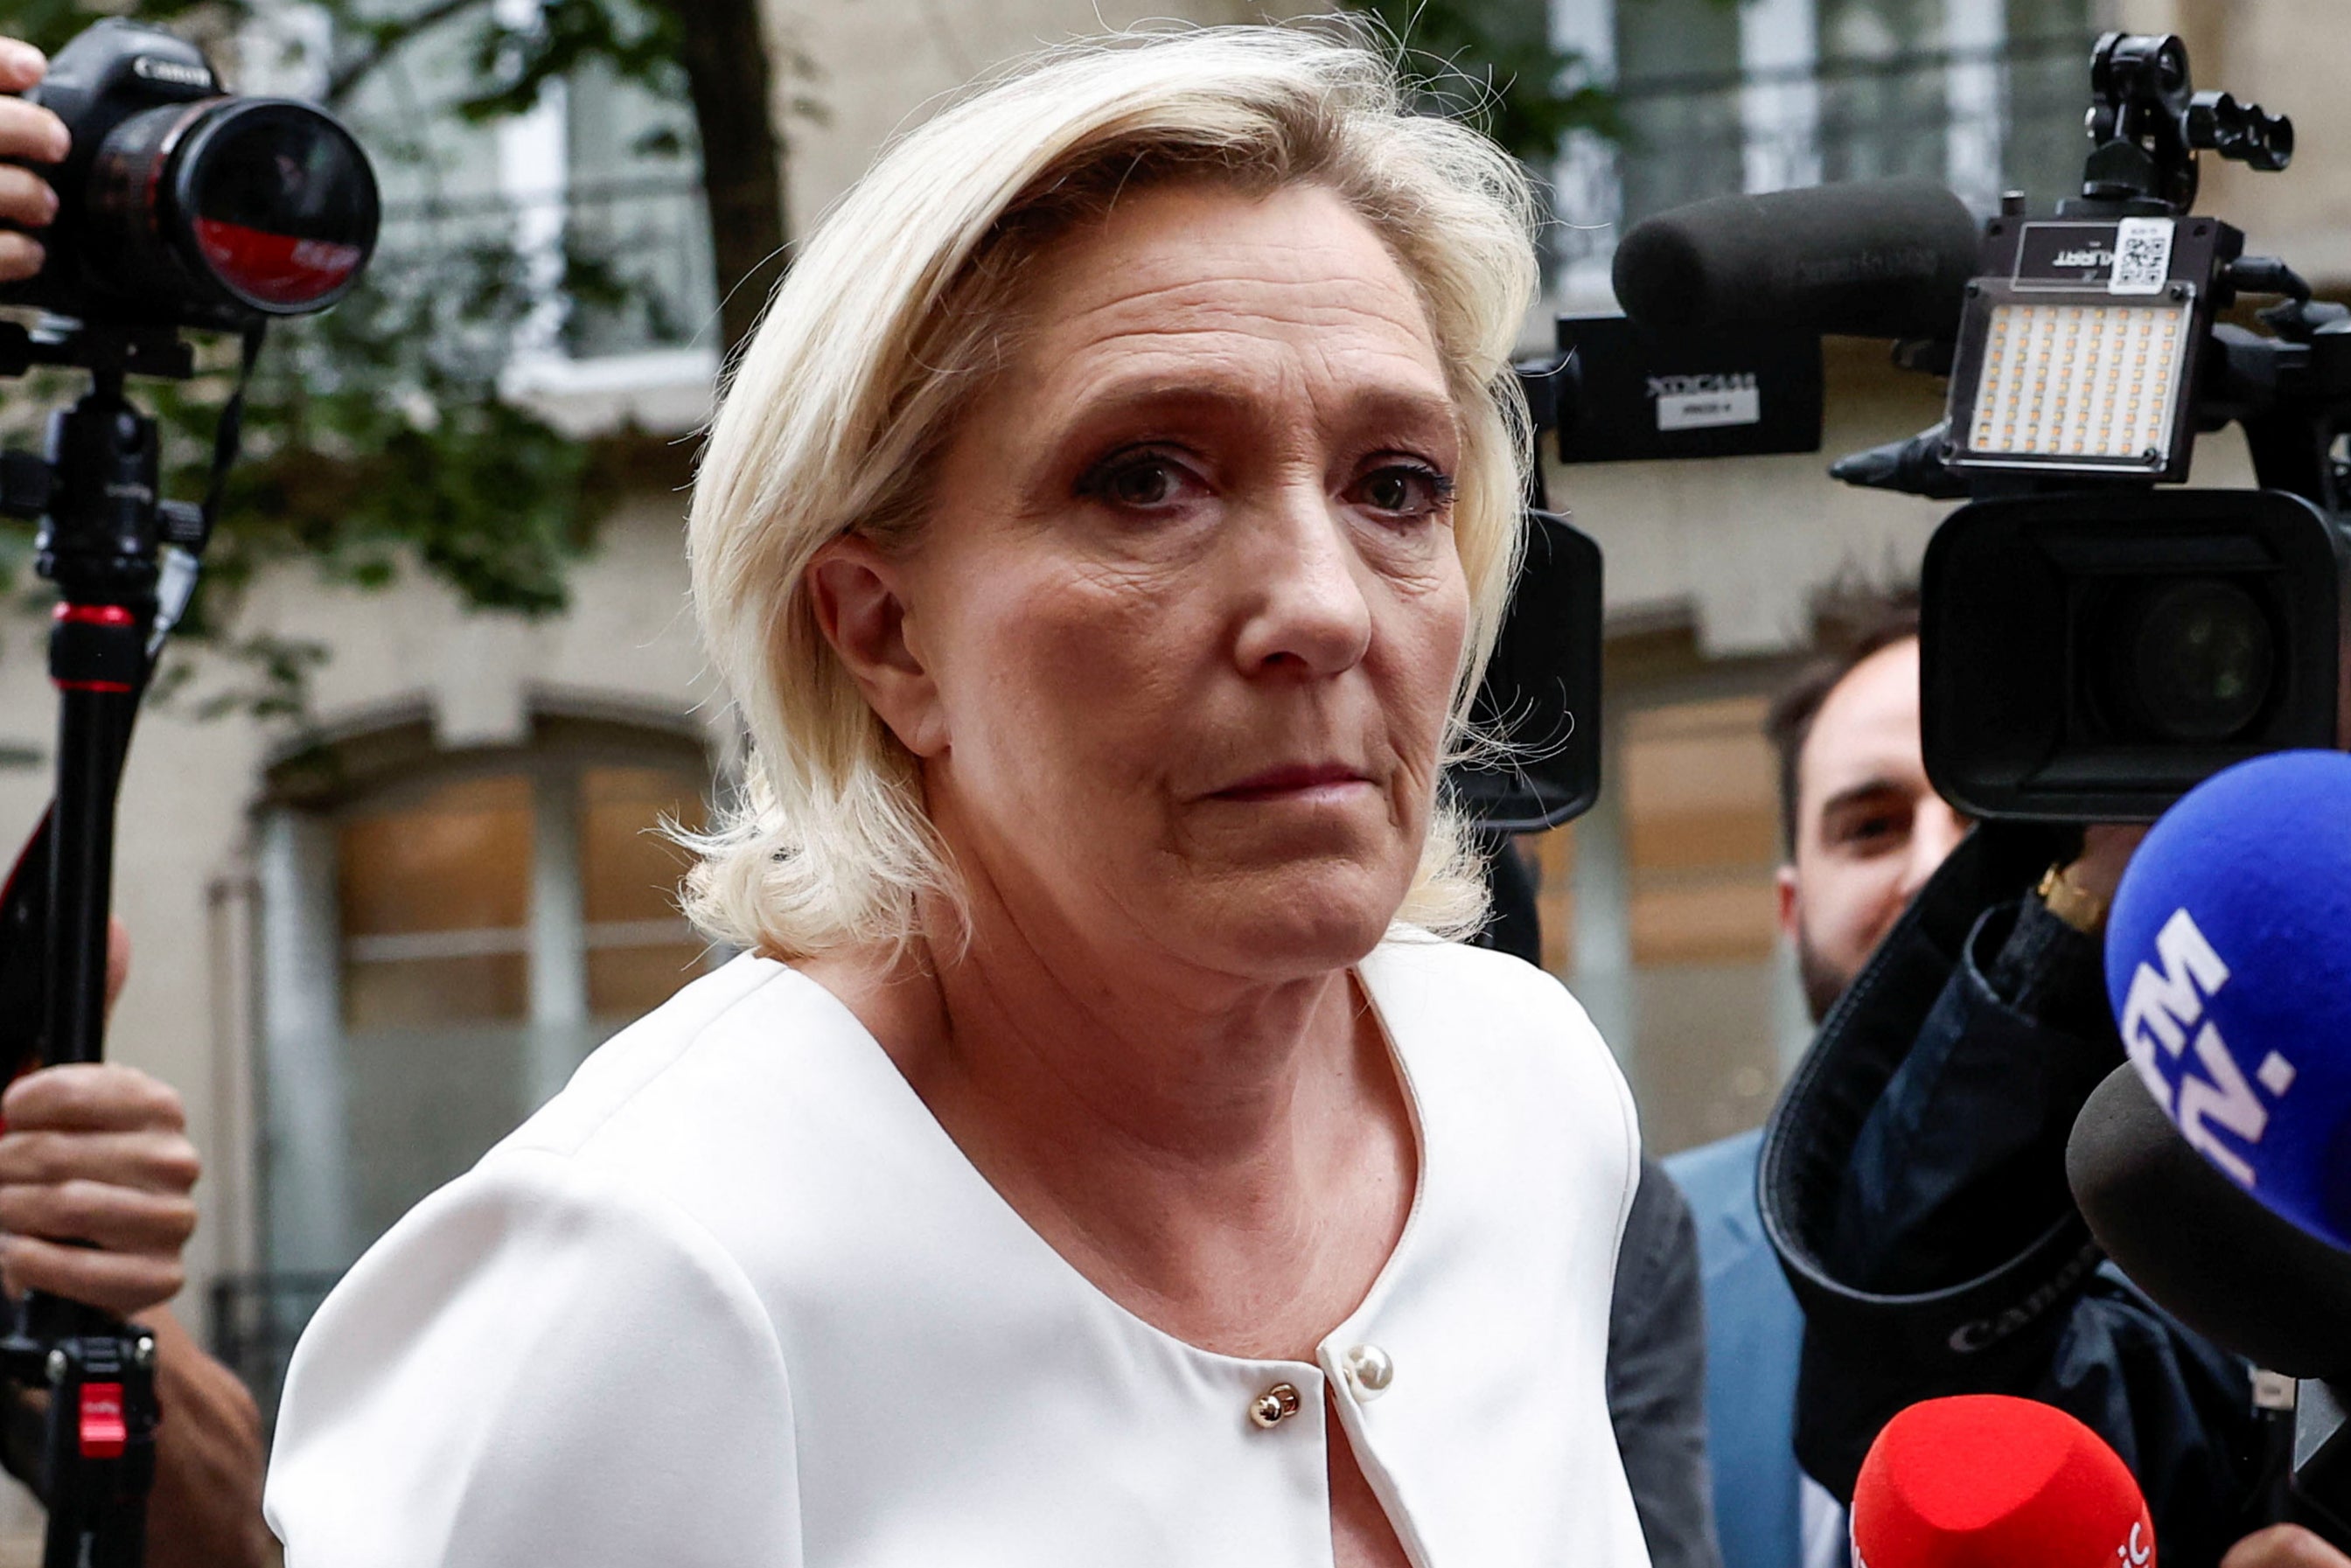 Le Pen’s party has topped the poll in France